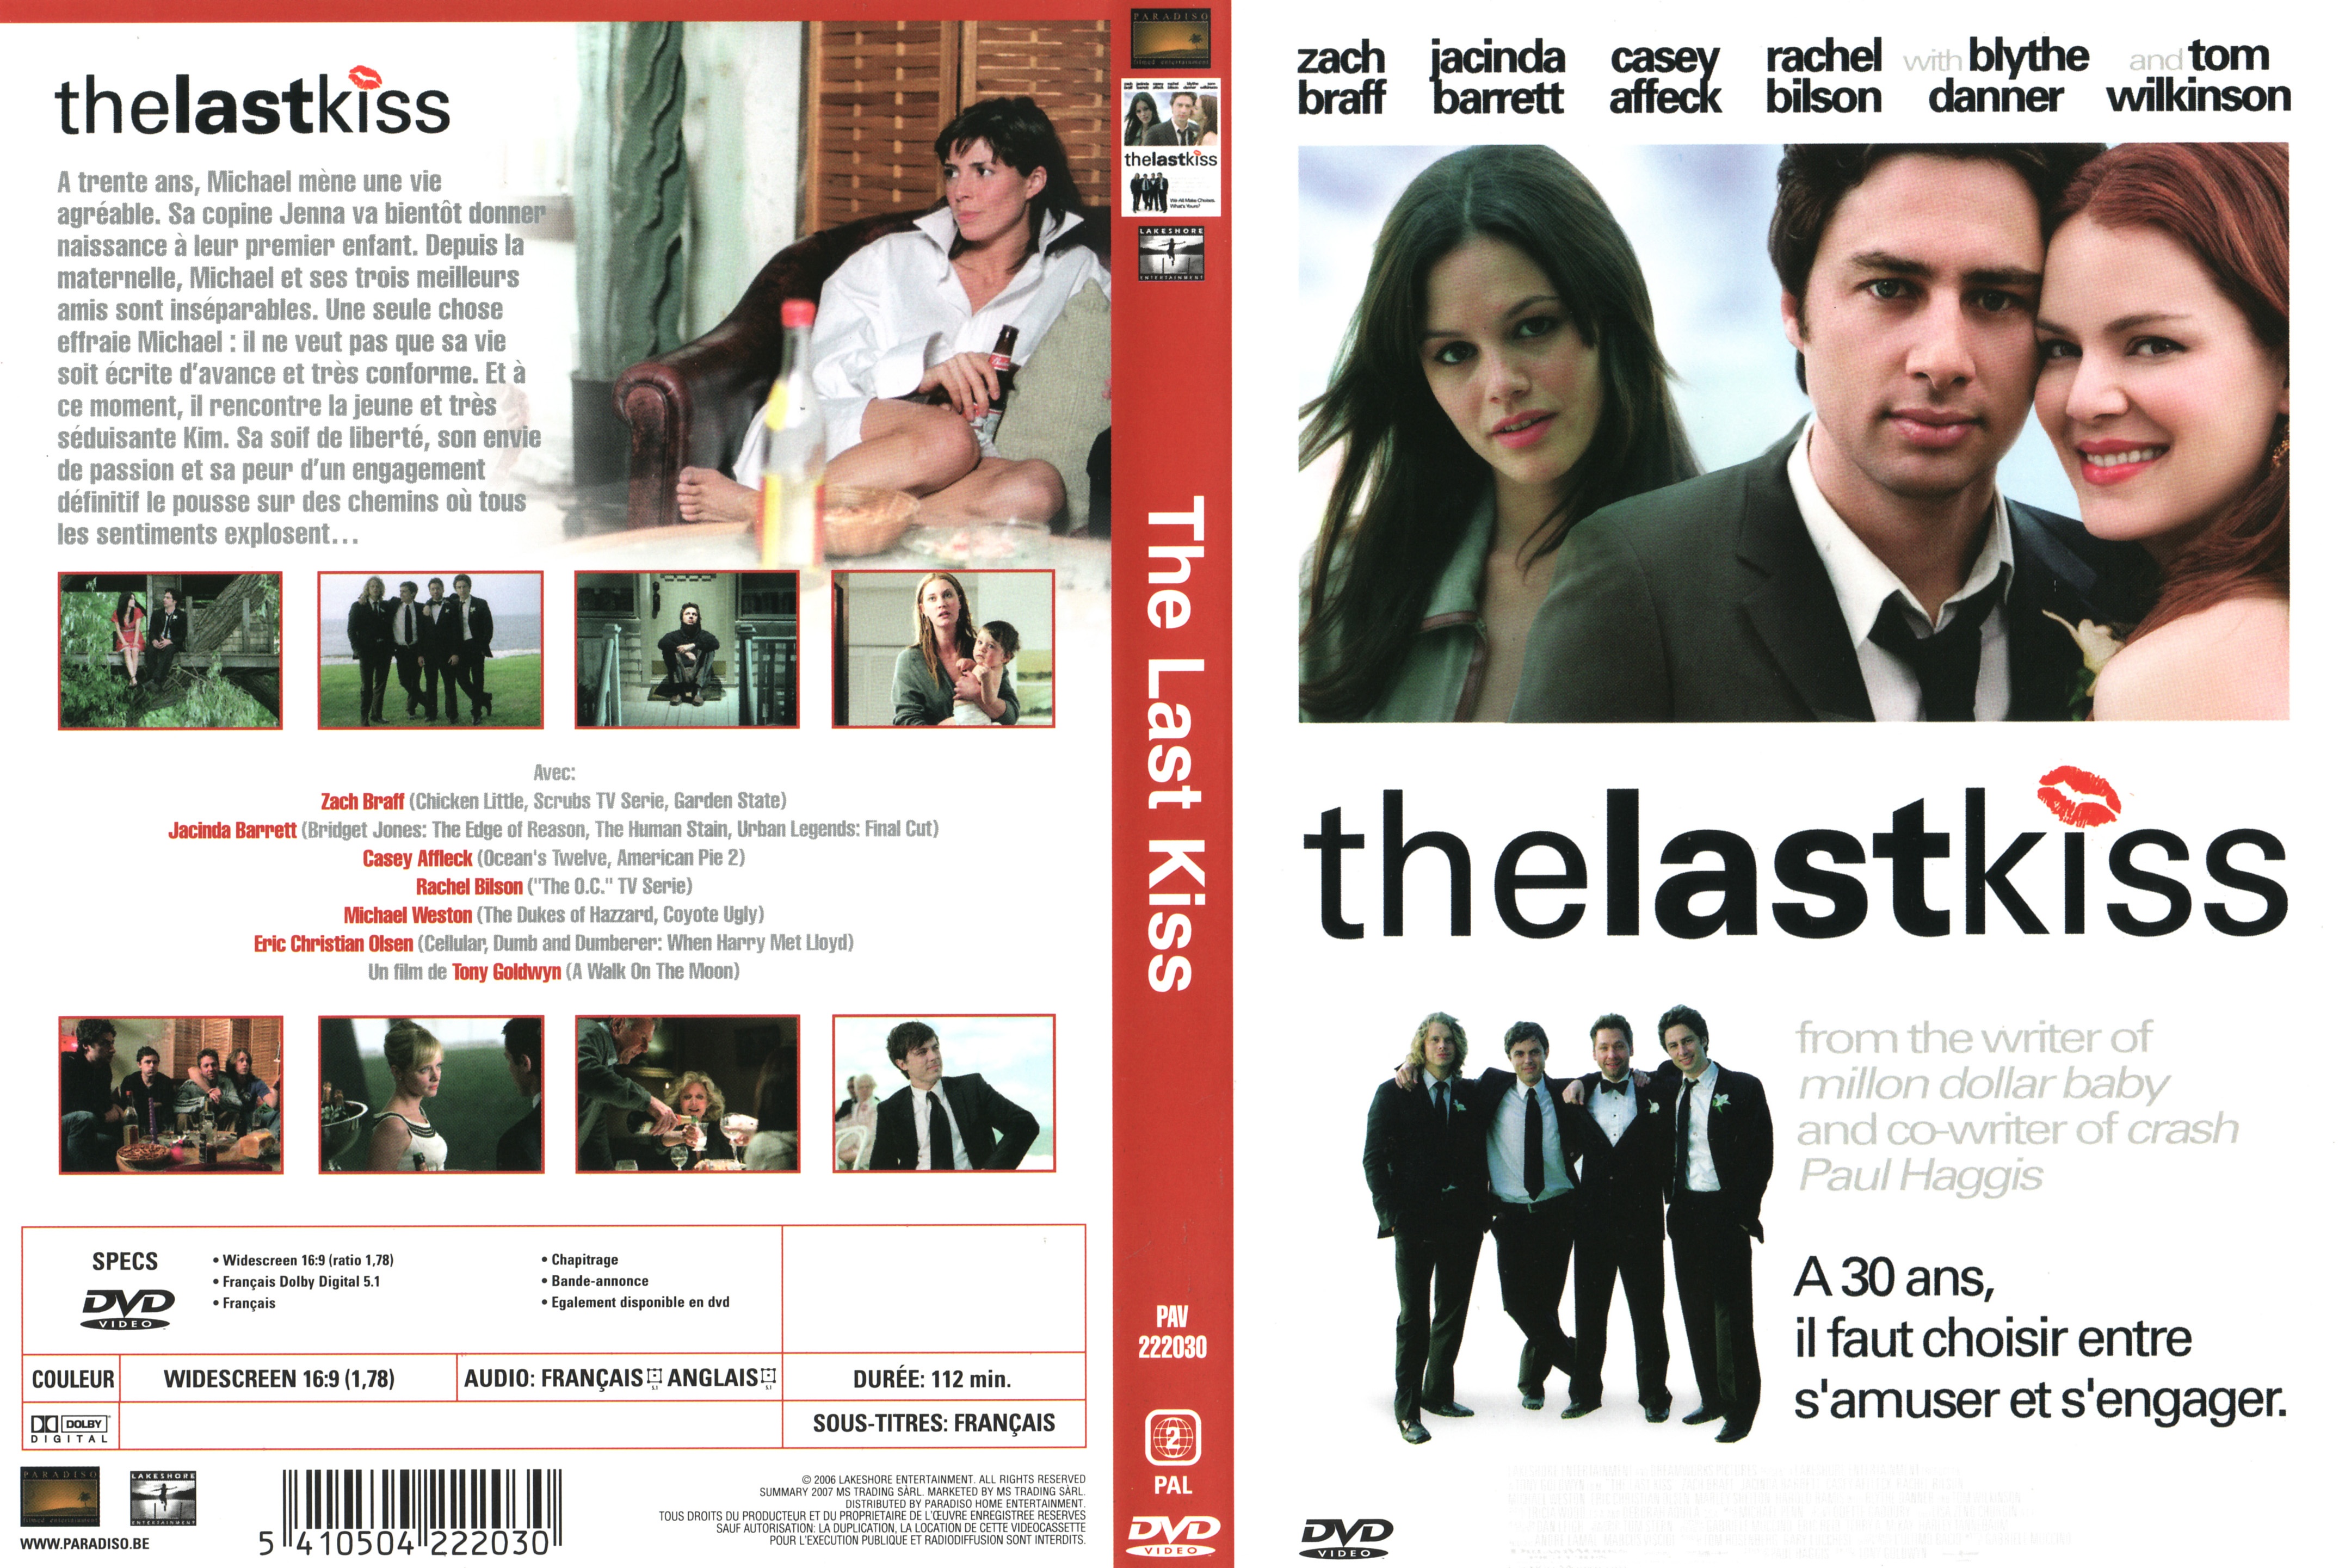 Jaquette DVD The last kiss